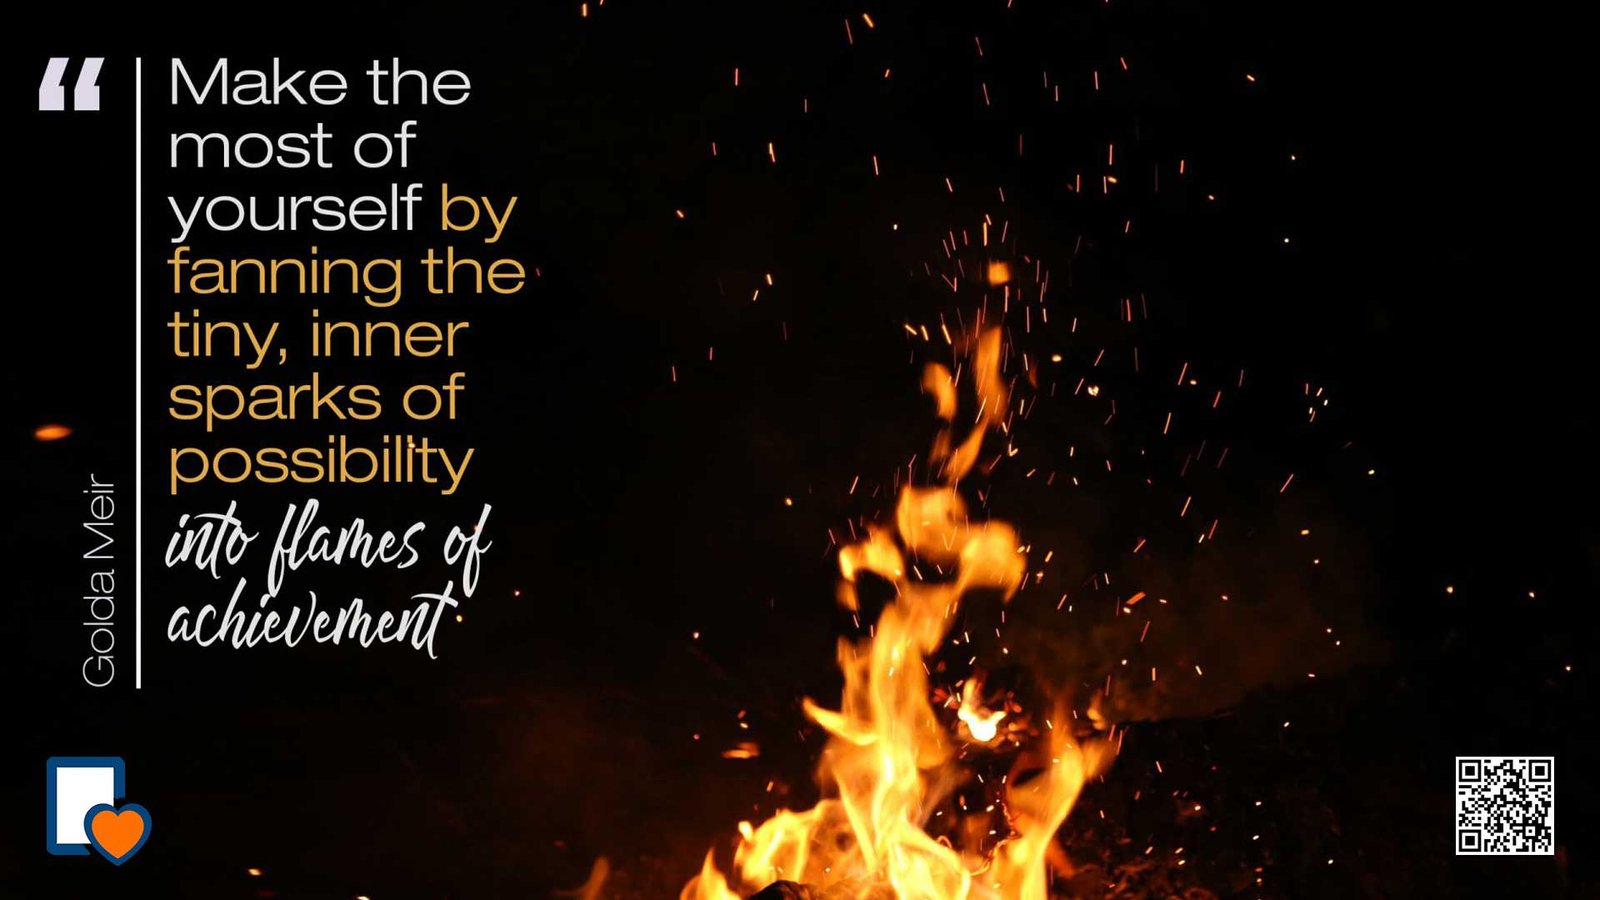 Make the Most of Yourself by Fanning the Tiny; Inner Sparks of Possibility into Flames of Achievement -Golda Meir